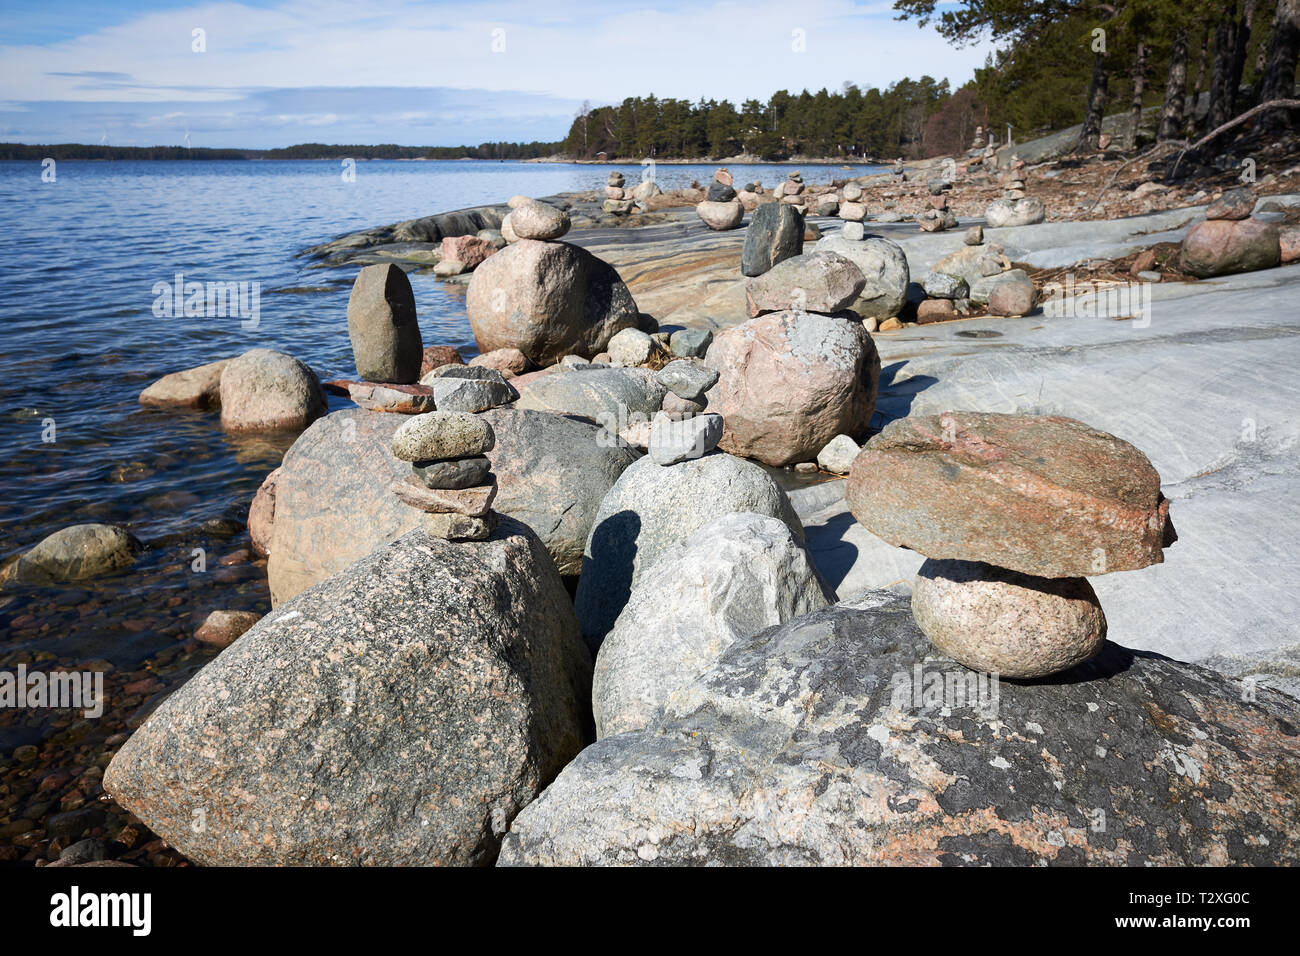 Peaceful summer landscape by the Baltic Sea in Kasnäs, Kemiö, Finland. Wide angle shot of the rocks on the seashore in the Finnish archipelago. Stock Photo